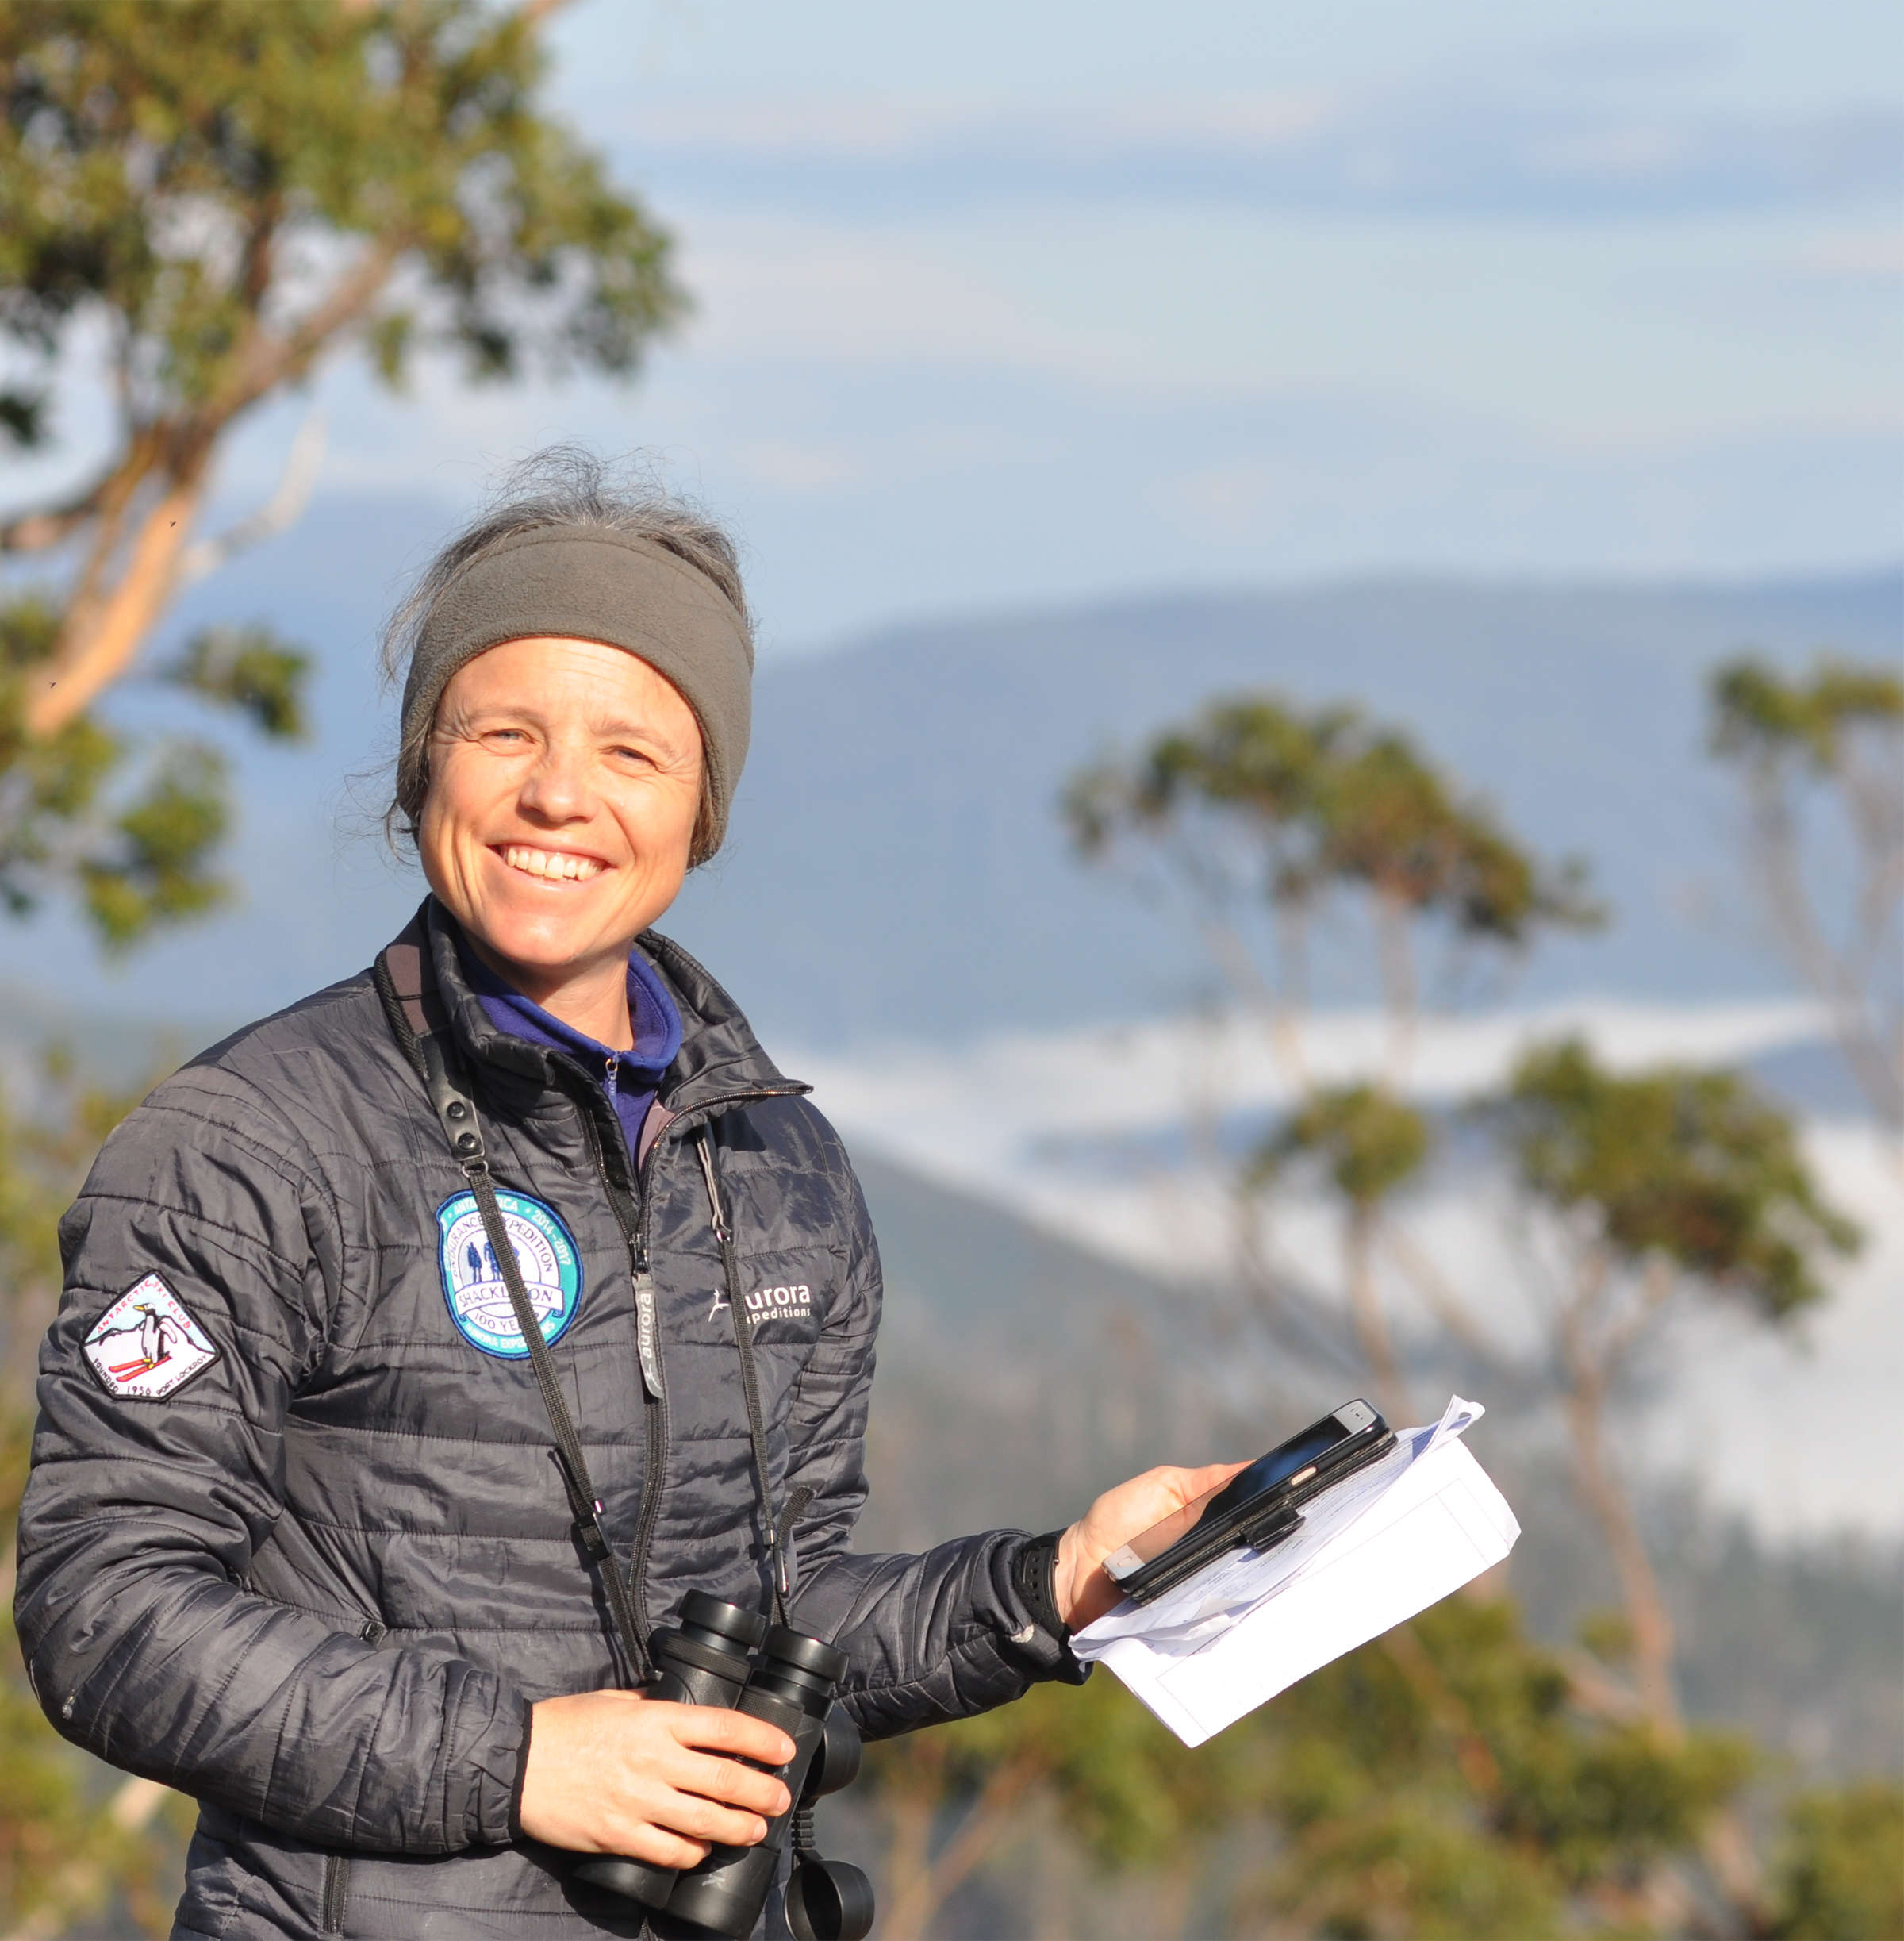 A woman wearing a down jacket and fleece headband smiles at the camera. She holds a smartphone and datasheets with one hand, while her other hand rests on her binoculars. Behind her are trees and, stretching off into the distance, a cloud-filled valley and mountains. Photo: Stephen Anstee.